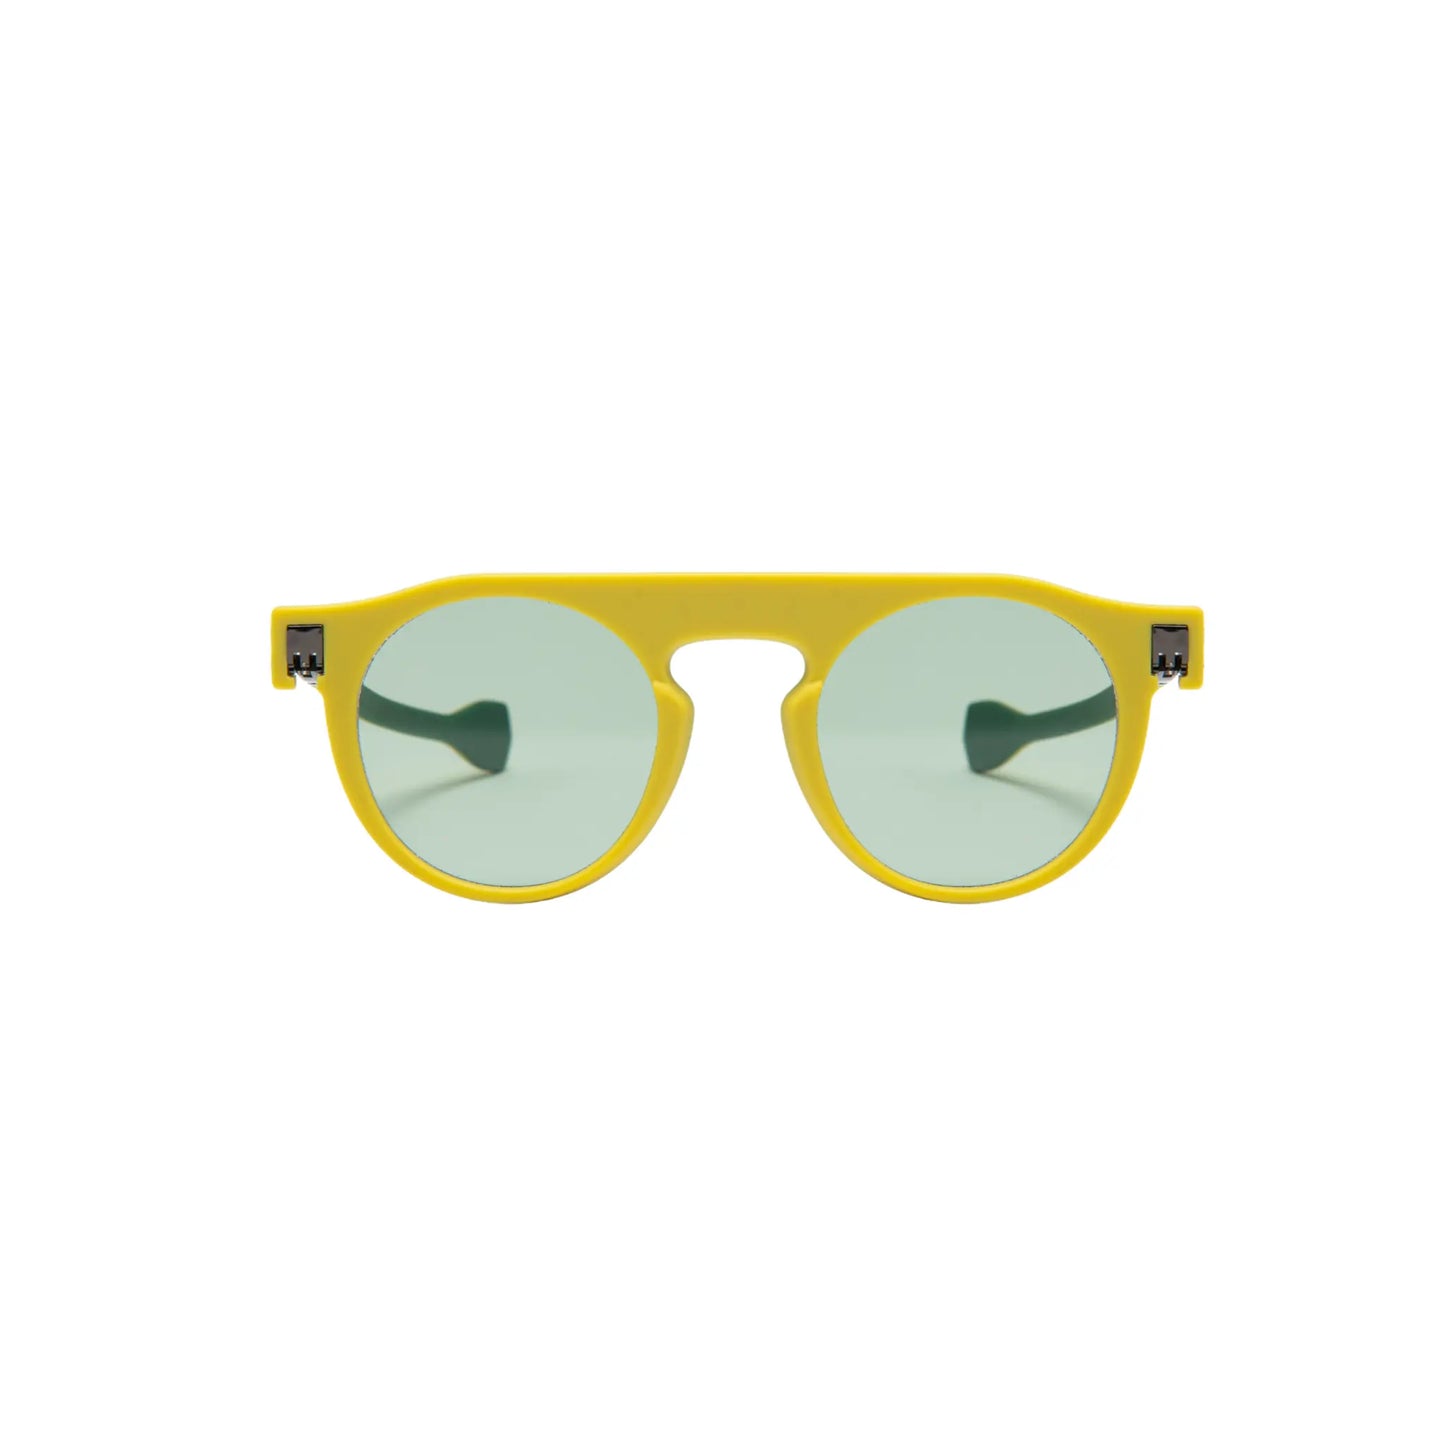 Reverso sunglasses green & yellow reversible & ultra light front view 1